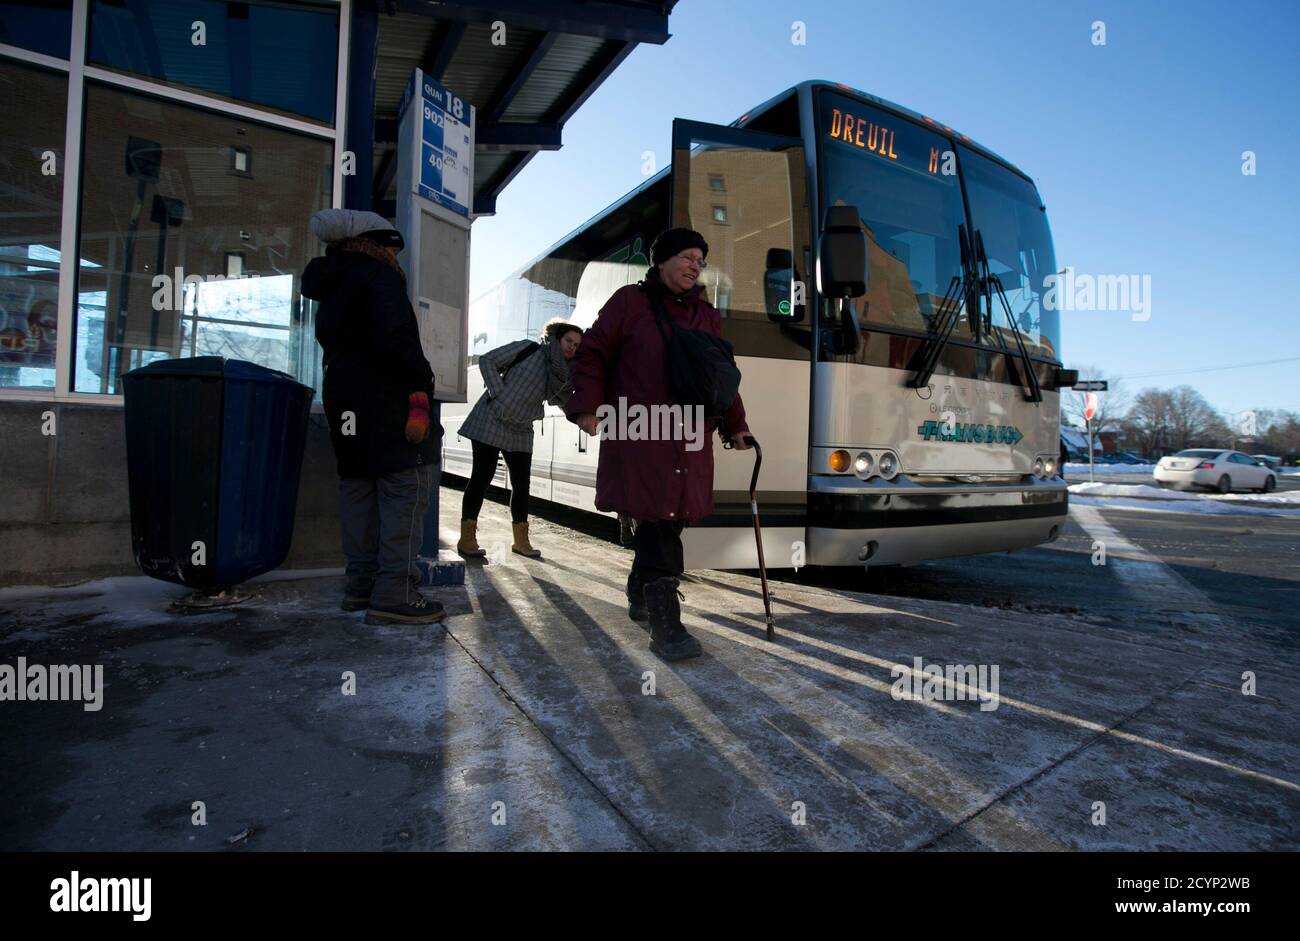 Commuters arrive by special bus from the Vaudreuil-Dorion train station to a metro line at Cote Vertu in Montreal, Quebec, February 16, 2015. A CP Rail strike left thousands of commuters from three major AMT commuter lines looking for alternate ways to get to work in downtown Montreal.  Canadian Pacific Railway Ltd began operating a reduced freight schedule run by its managers on Sunday, after talks on a new contract broke down and more than 3,000 train engineers and conductors walked off the job. Canada's No. 2 railway and the Teamsters Canada Rail Conference failed to agree on terms includin Stock Photo